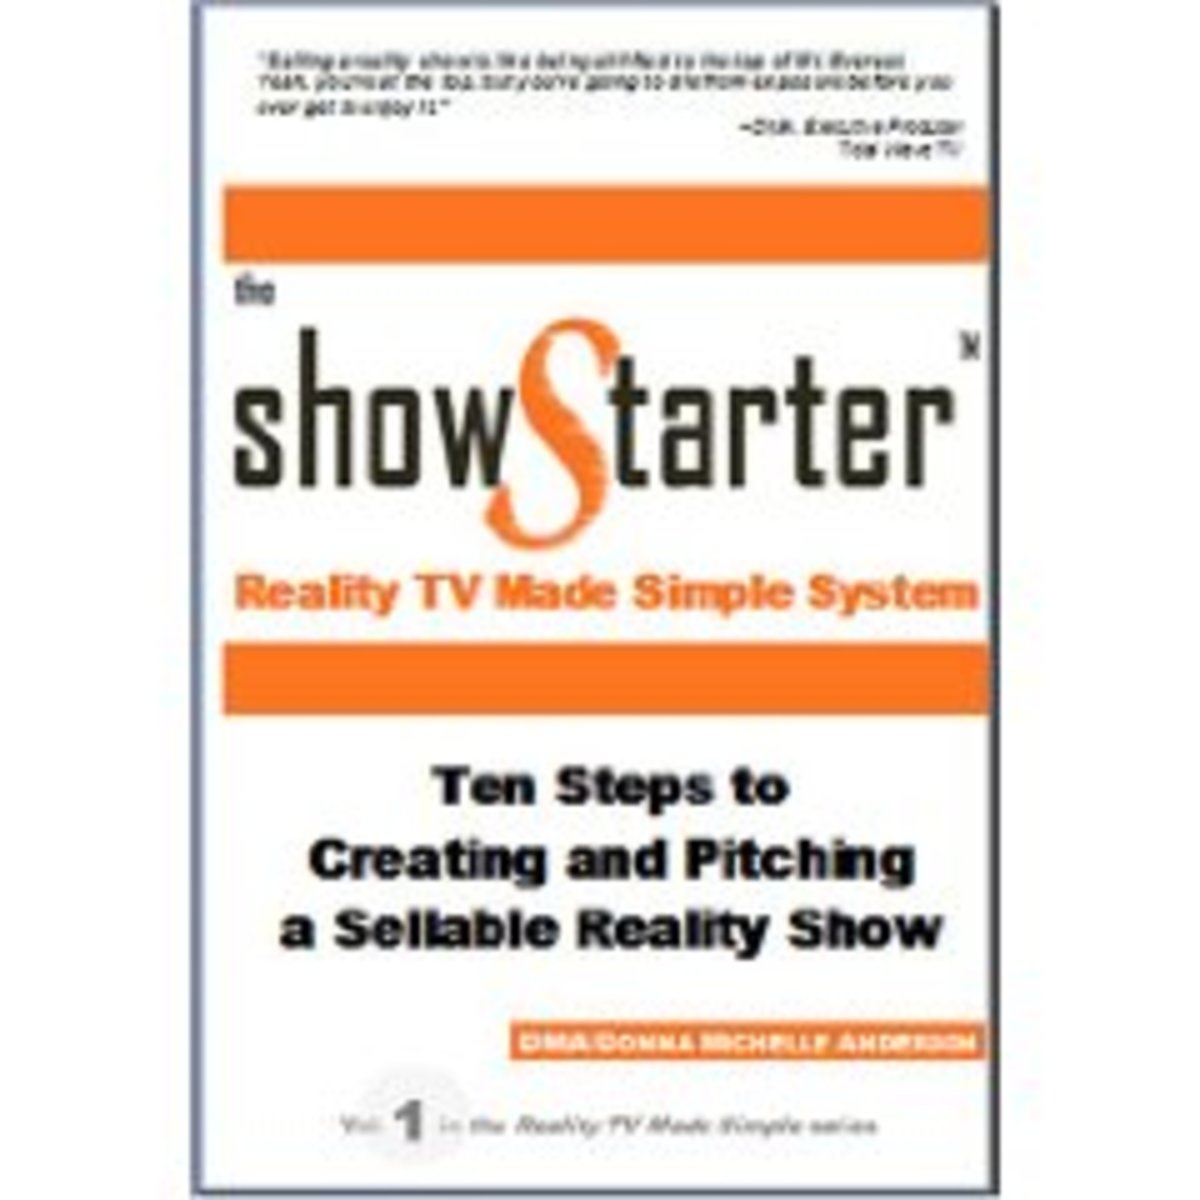 The Show Starter Reality TV Made Simple System